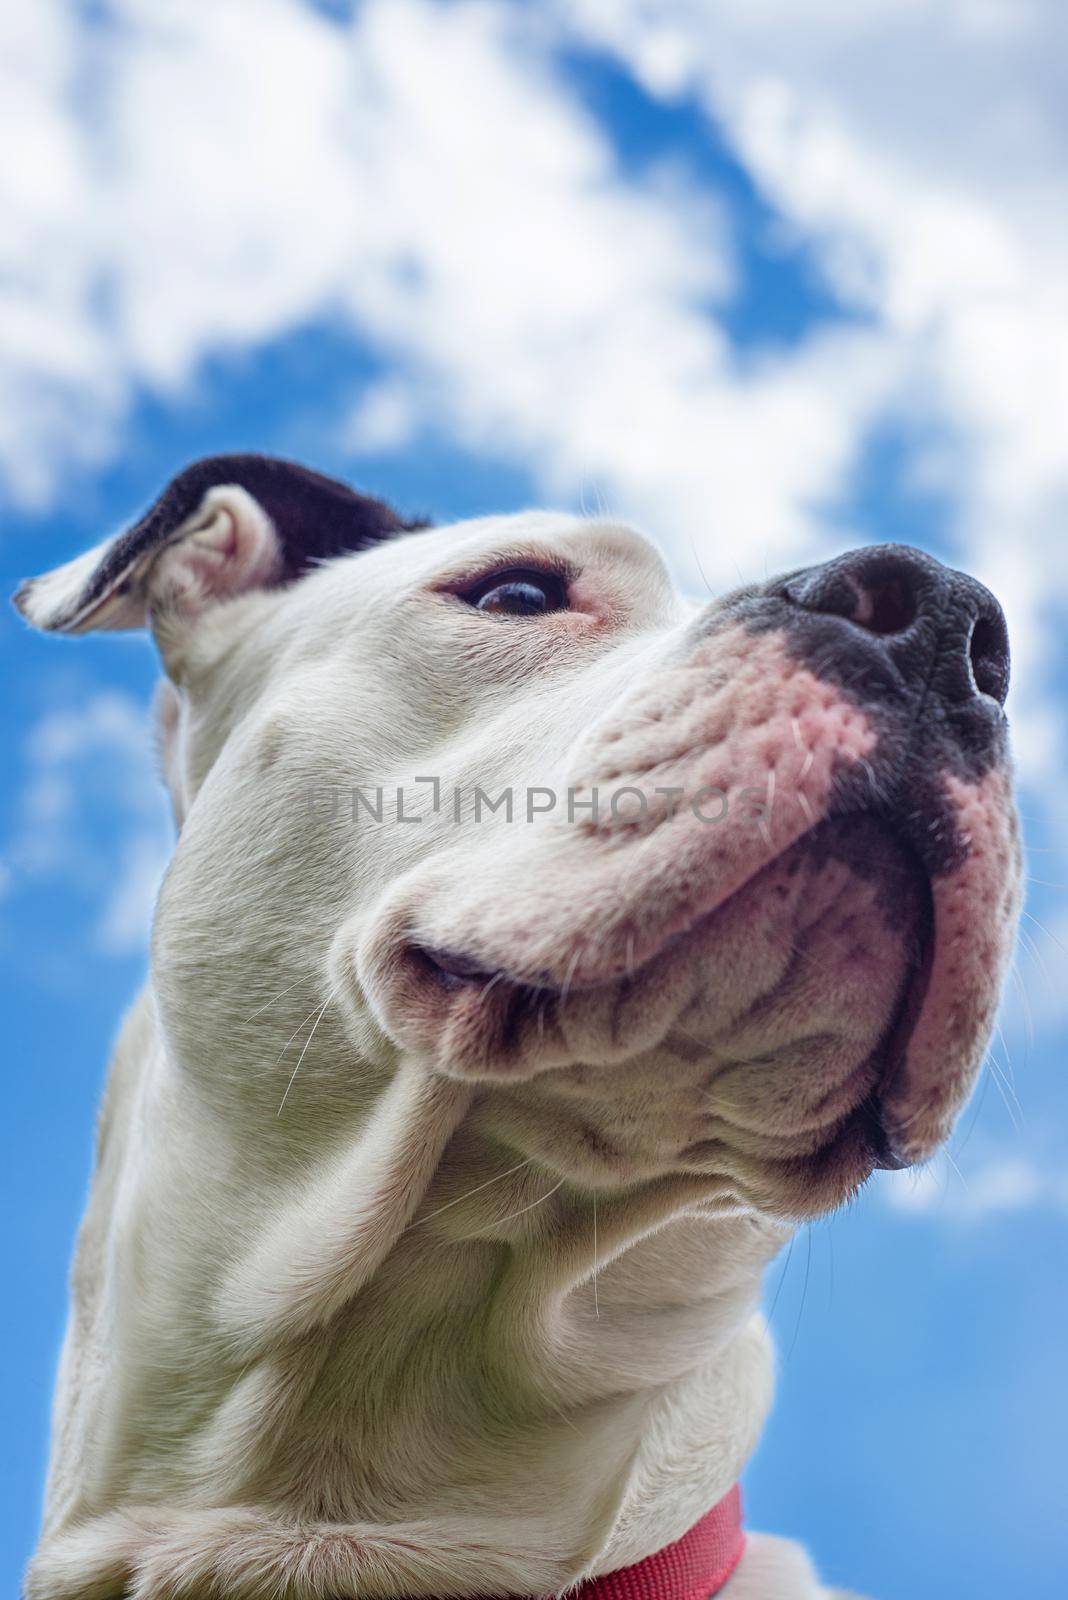 Heroic portrait of a white female pitbull terrier dog, from below under a cloudy blue sky.